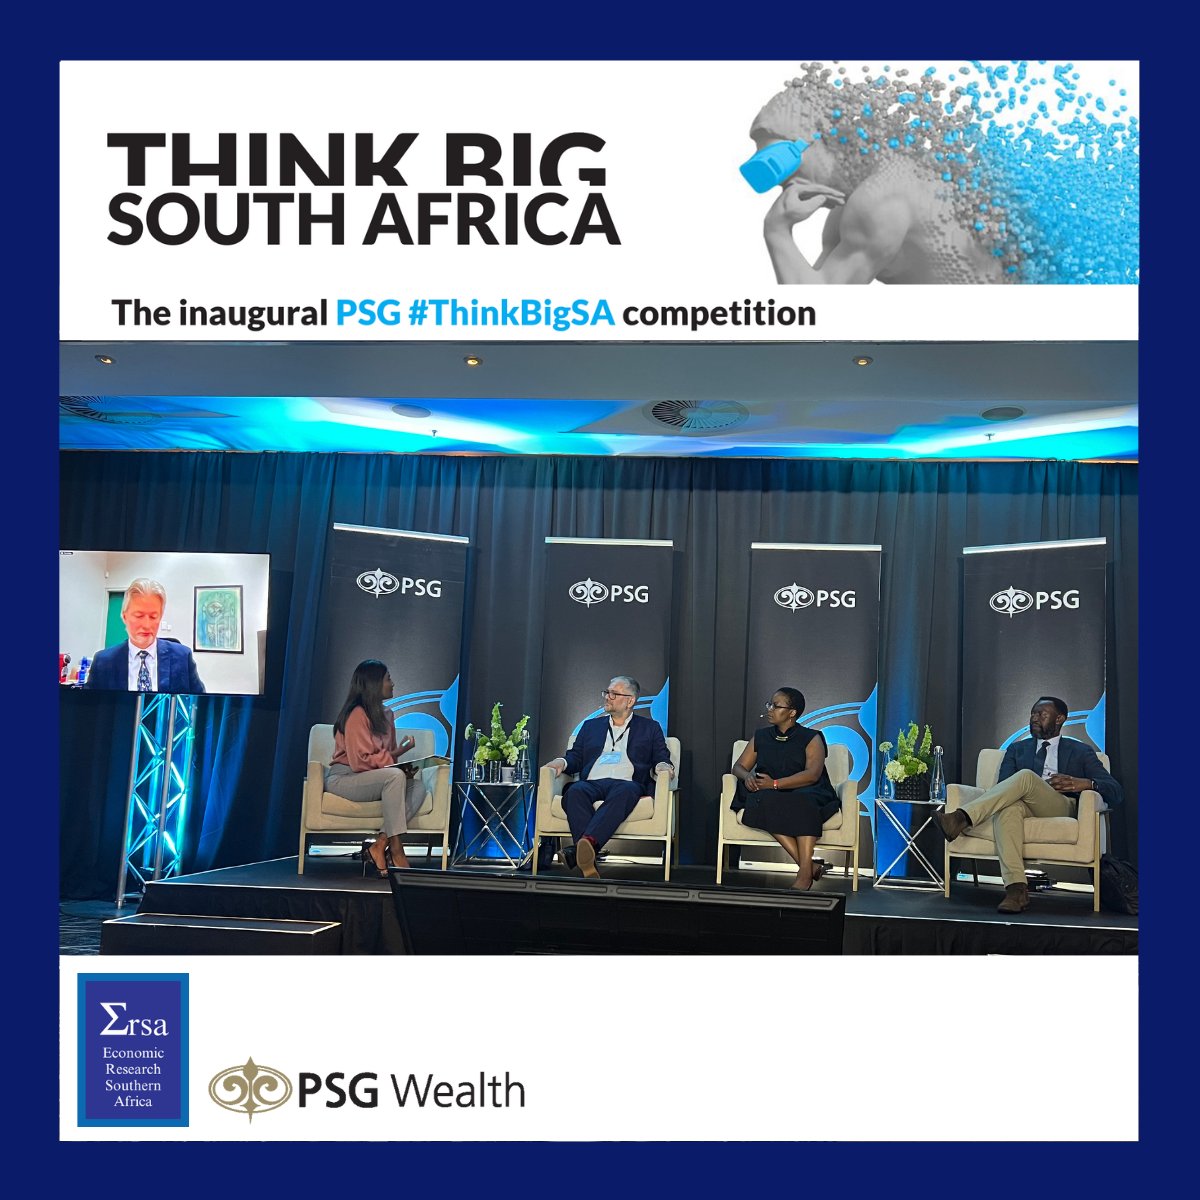 What an informative, inspiring discussion on the importance of inclusive growth for a sustainable SA by the #ThinkBigSA competition judges! Learn more: econrsa.org/psg-thinkbigsa/ @alishiaseckam @PhilippeBurger @MichaelSachs99 @william_gumede @mamokete30 @GraceBaskaran @PSGWealth